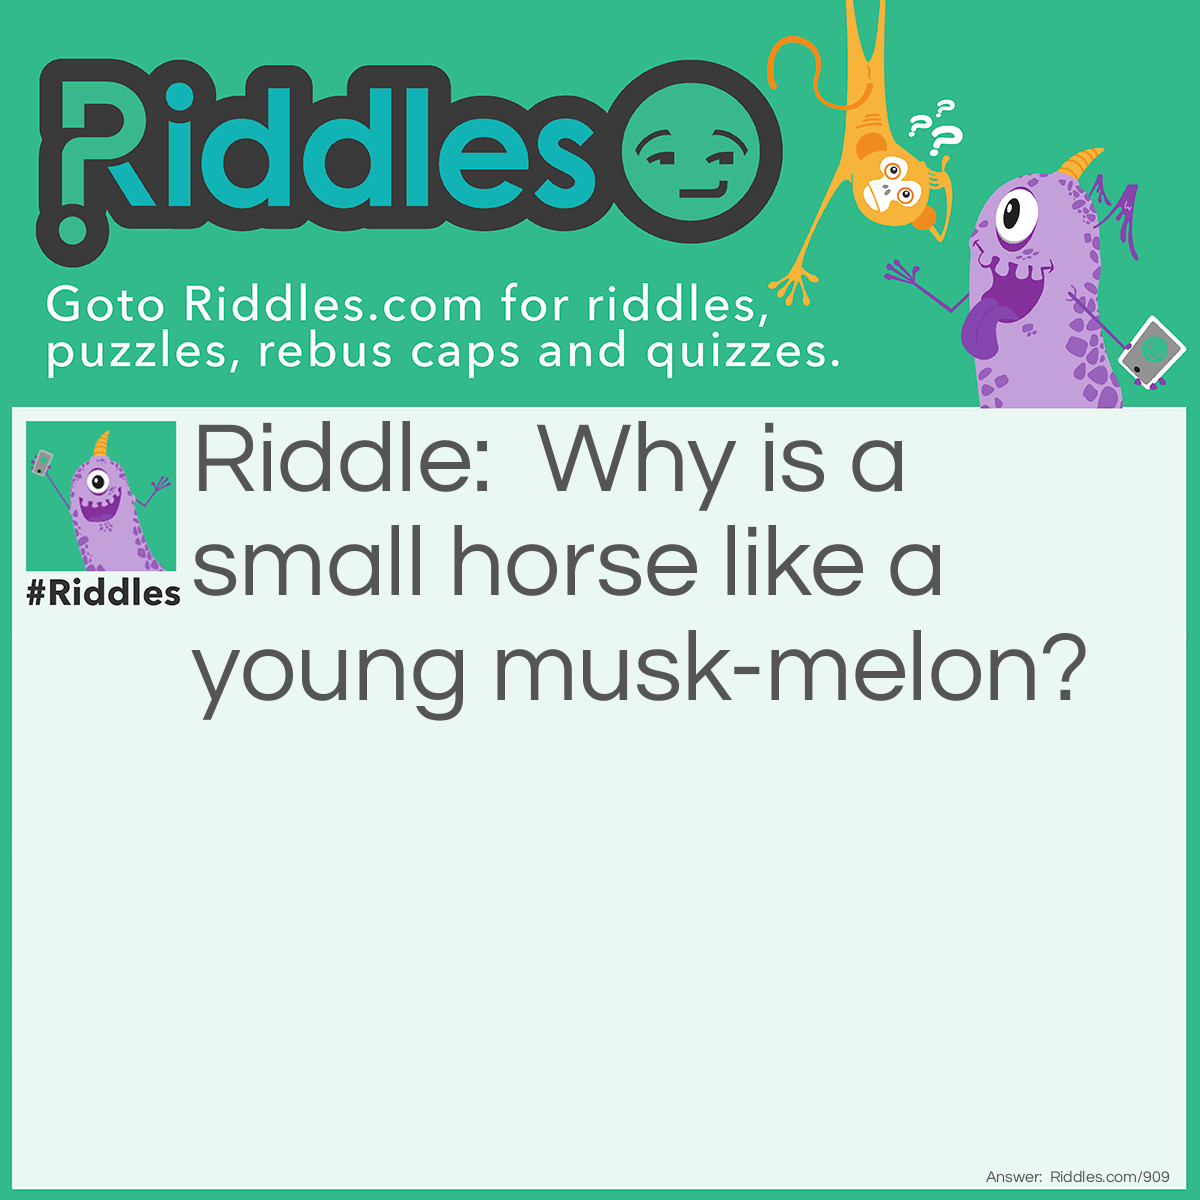 Riddle: Why is a small horse like a young musk-melon? Answer: Because it makes a <em>man go</em>.